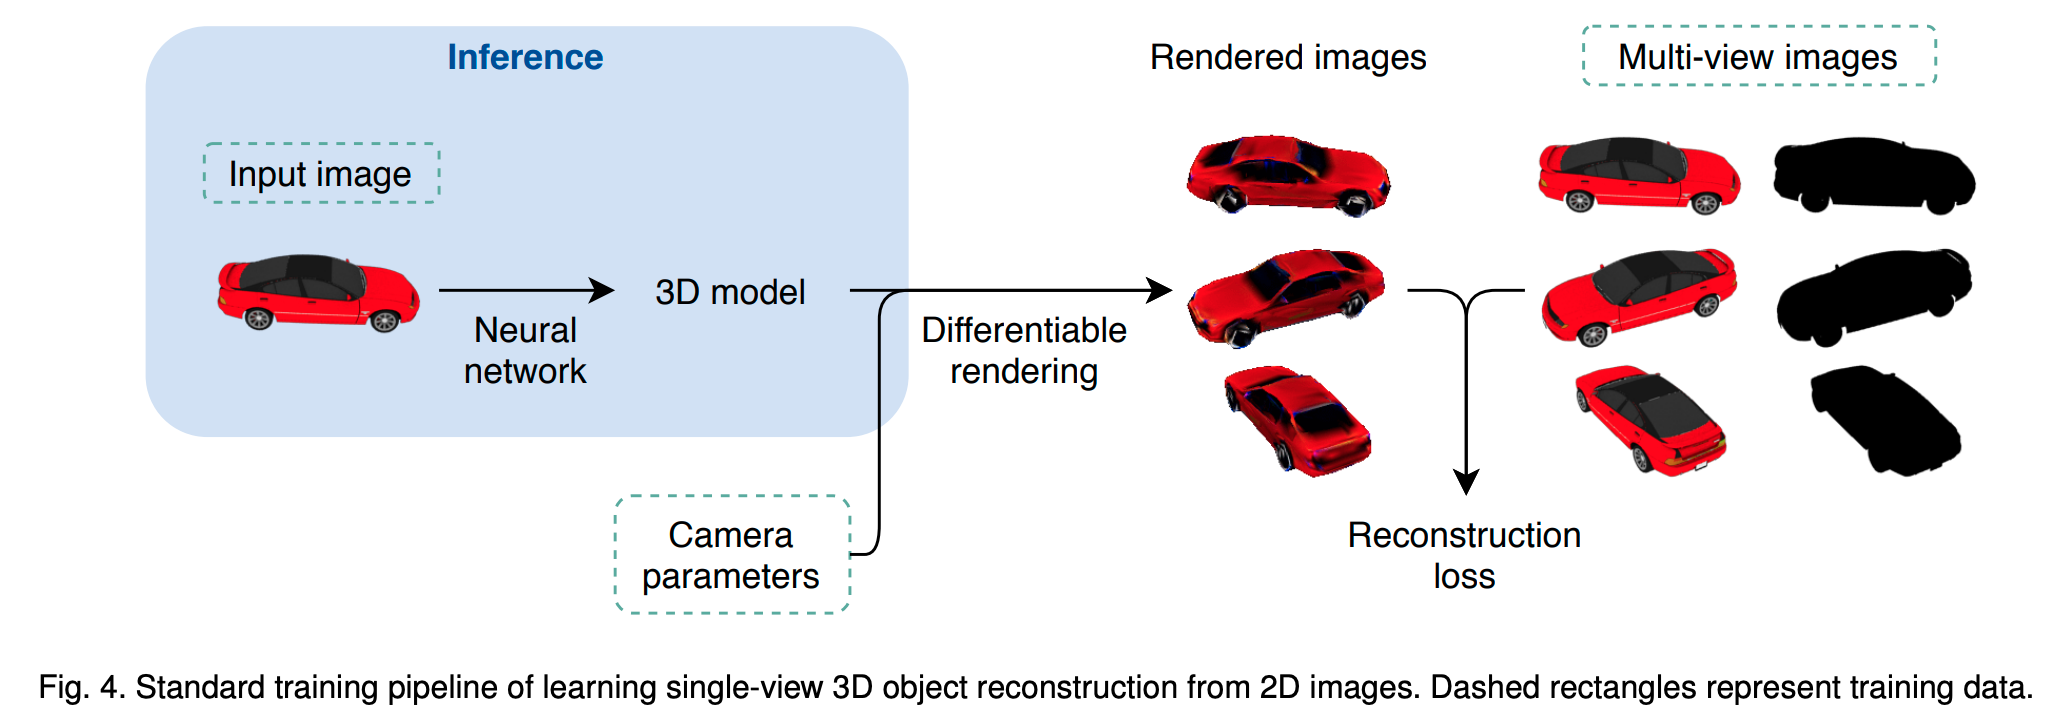 Differentiable rendering training overview